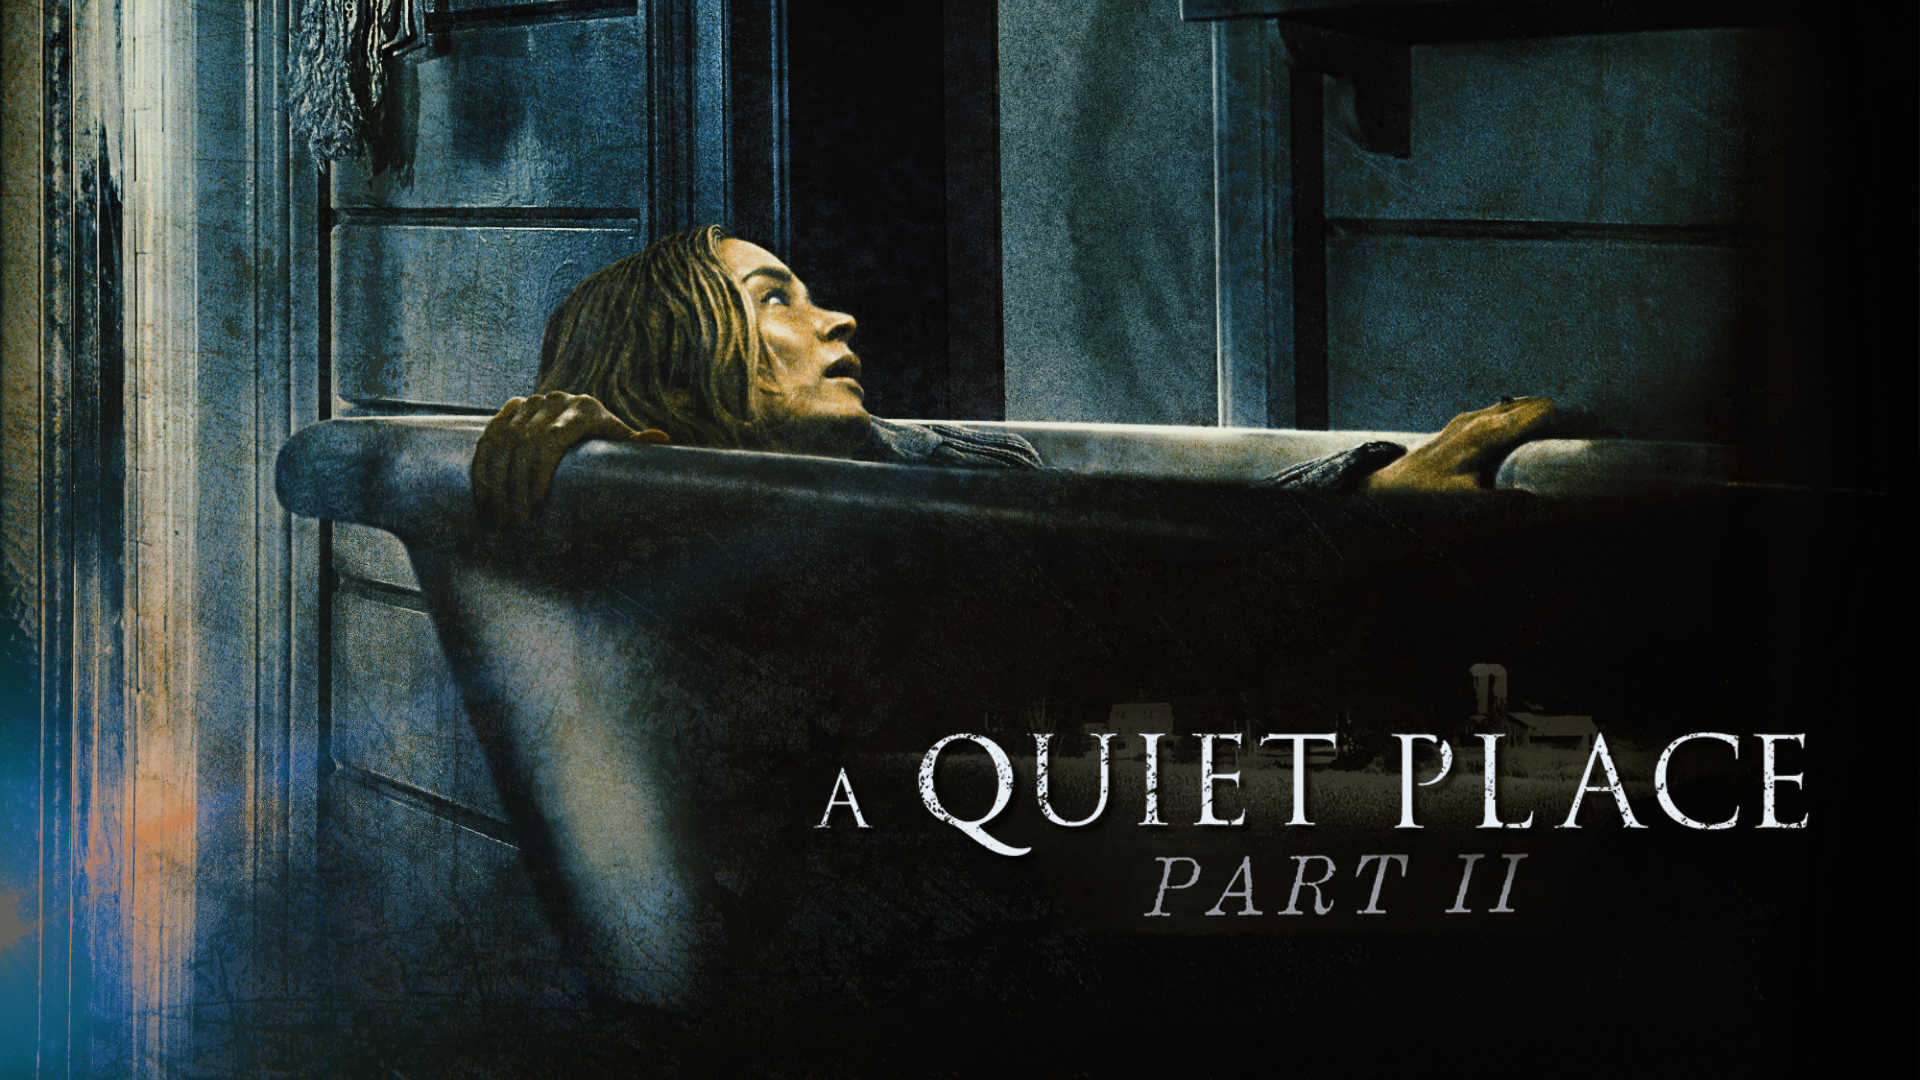 A Quiet Place Part II: Develop a Silent Princess Character with Emily Blunt